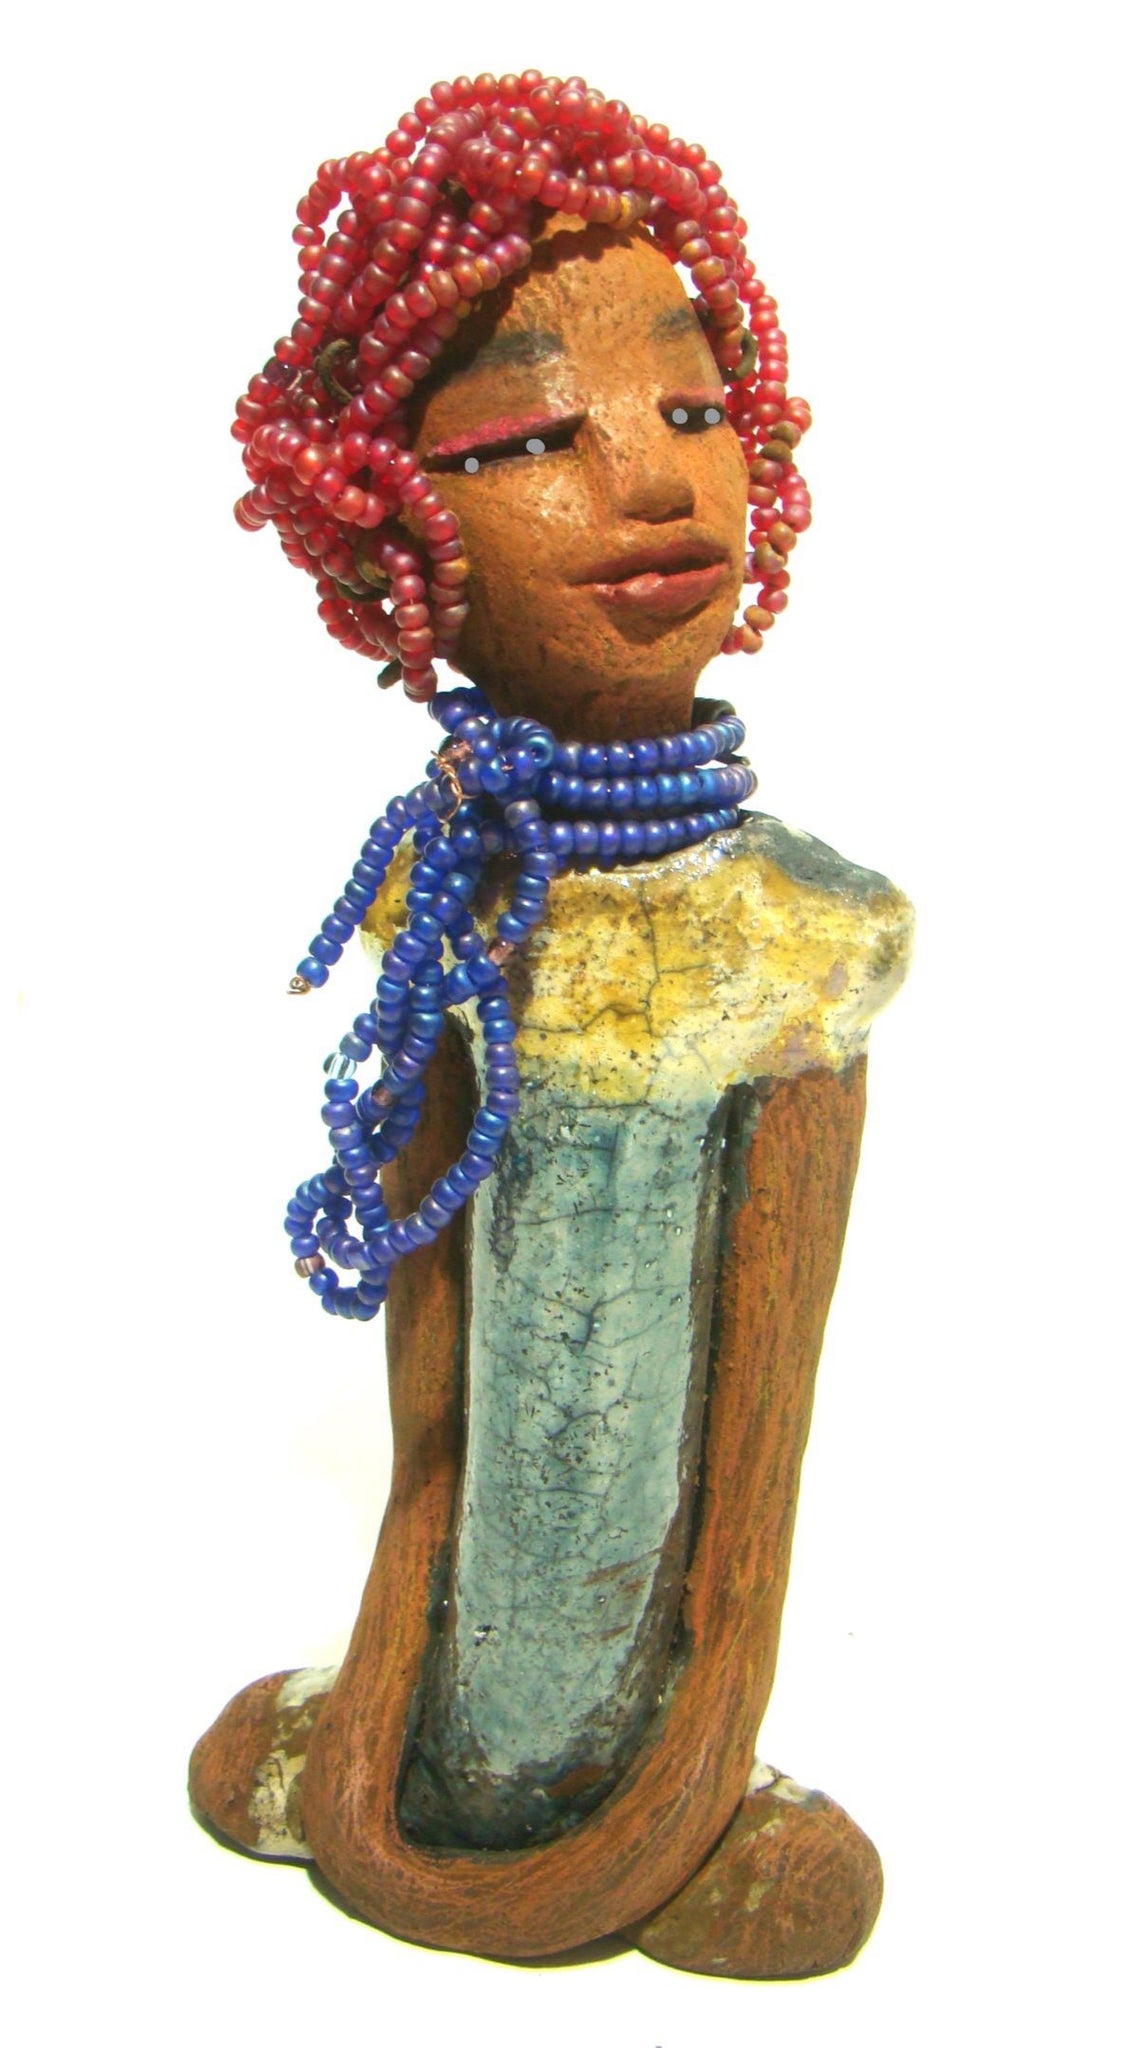 Tiffany stands 10" x 4.5" x 2" and weighs 1.05 lbs. She has a lovely honey tan complexion with purple beaded hair. Tiffany dress is glazed with blue and gold crackle. She wears a blue beaded necklace scarf.